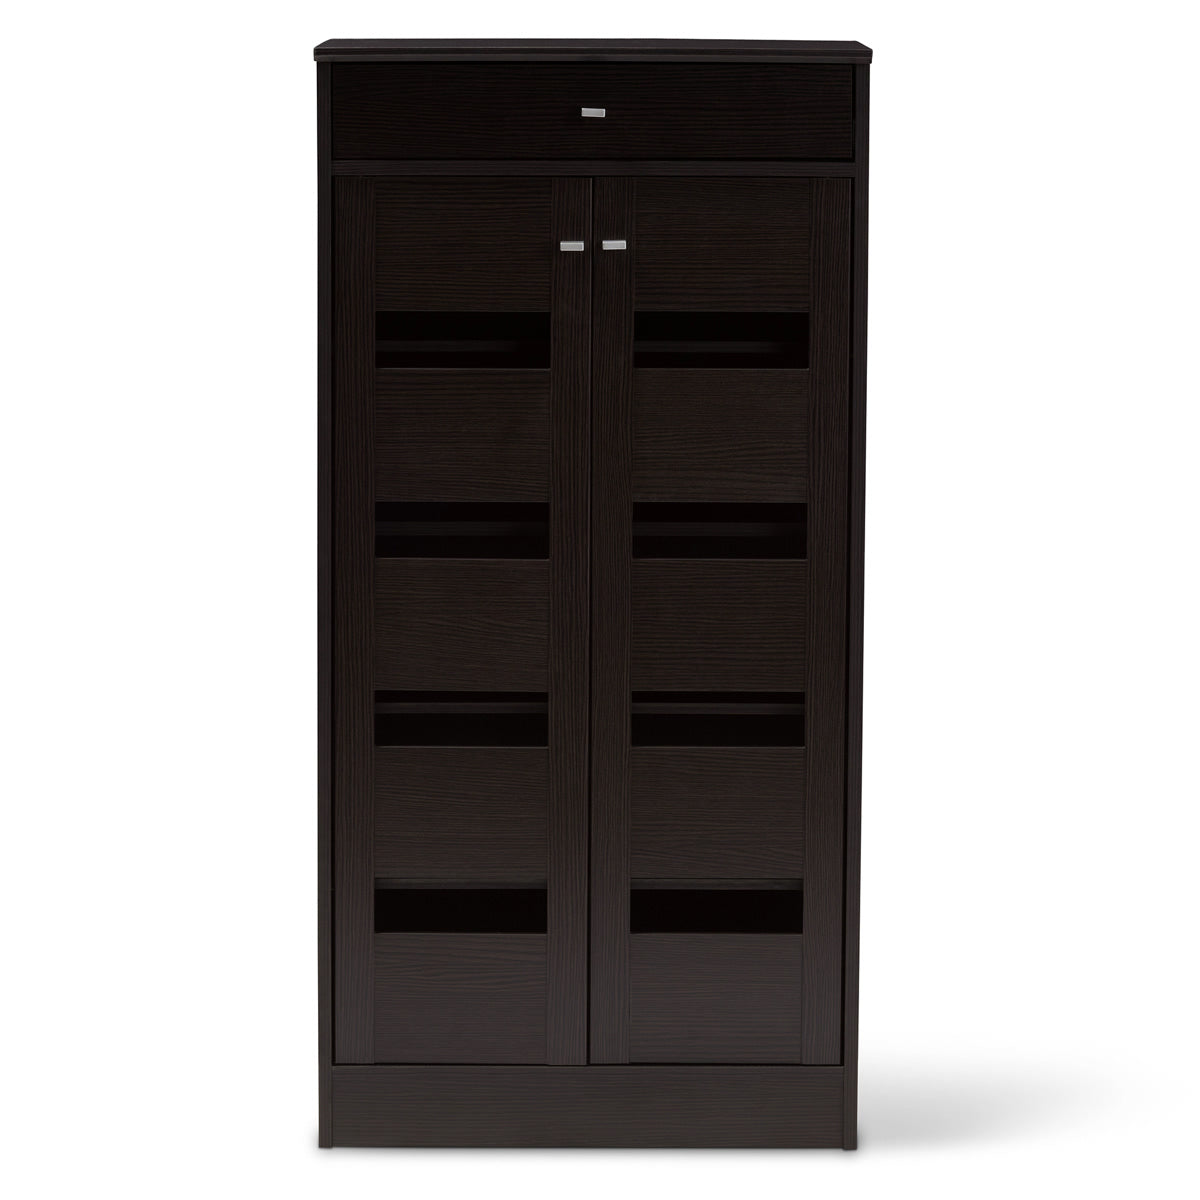 Baxton Studio Acadia Modern and Contemporary Wenge Brown Finished Shoe Cabinet Baxton Studio-0-Minimal And Modern - 6